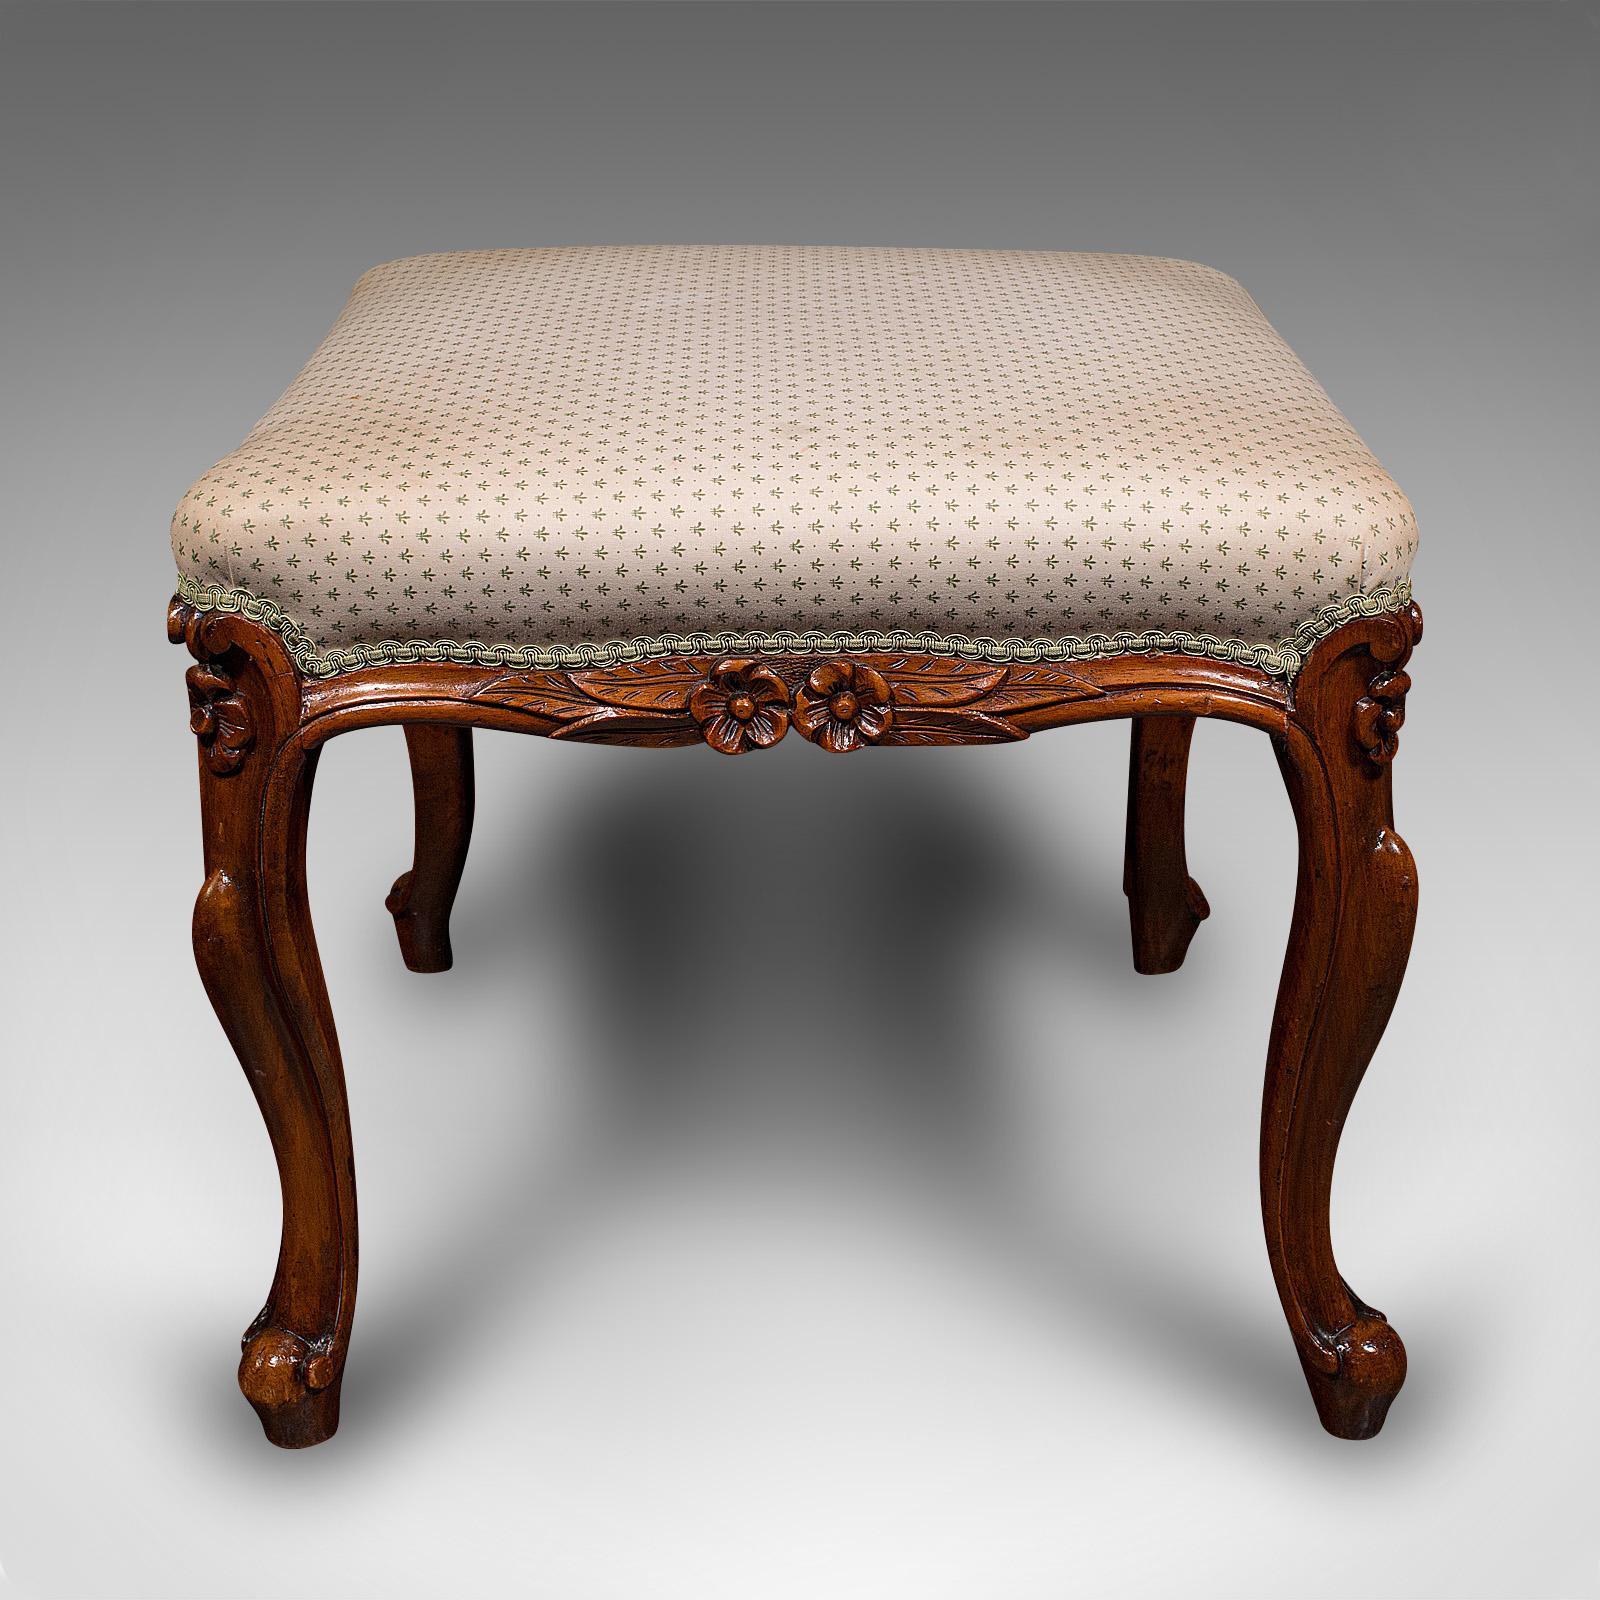 19th Century Wide Antique Dressing Stool, English, Walnut Bedroom Seat, Early Victorian, 1840 For Sale